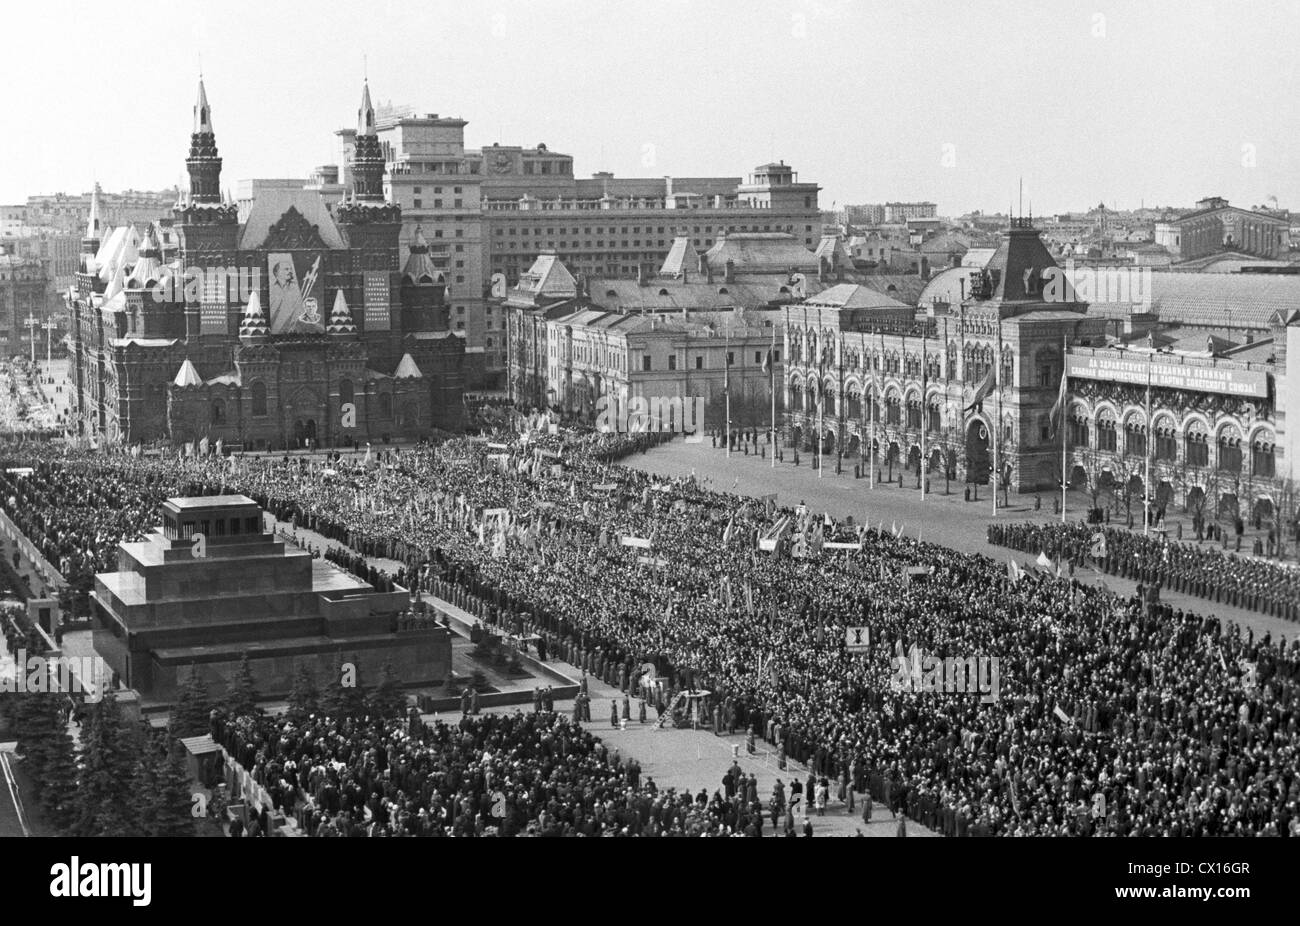 moscow-ussr-red-square-people-celebrating-the-first-flight-of-a-human-CX16GR.jpg